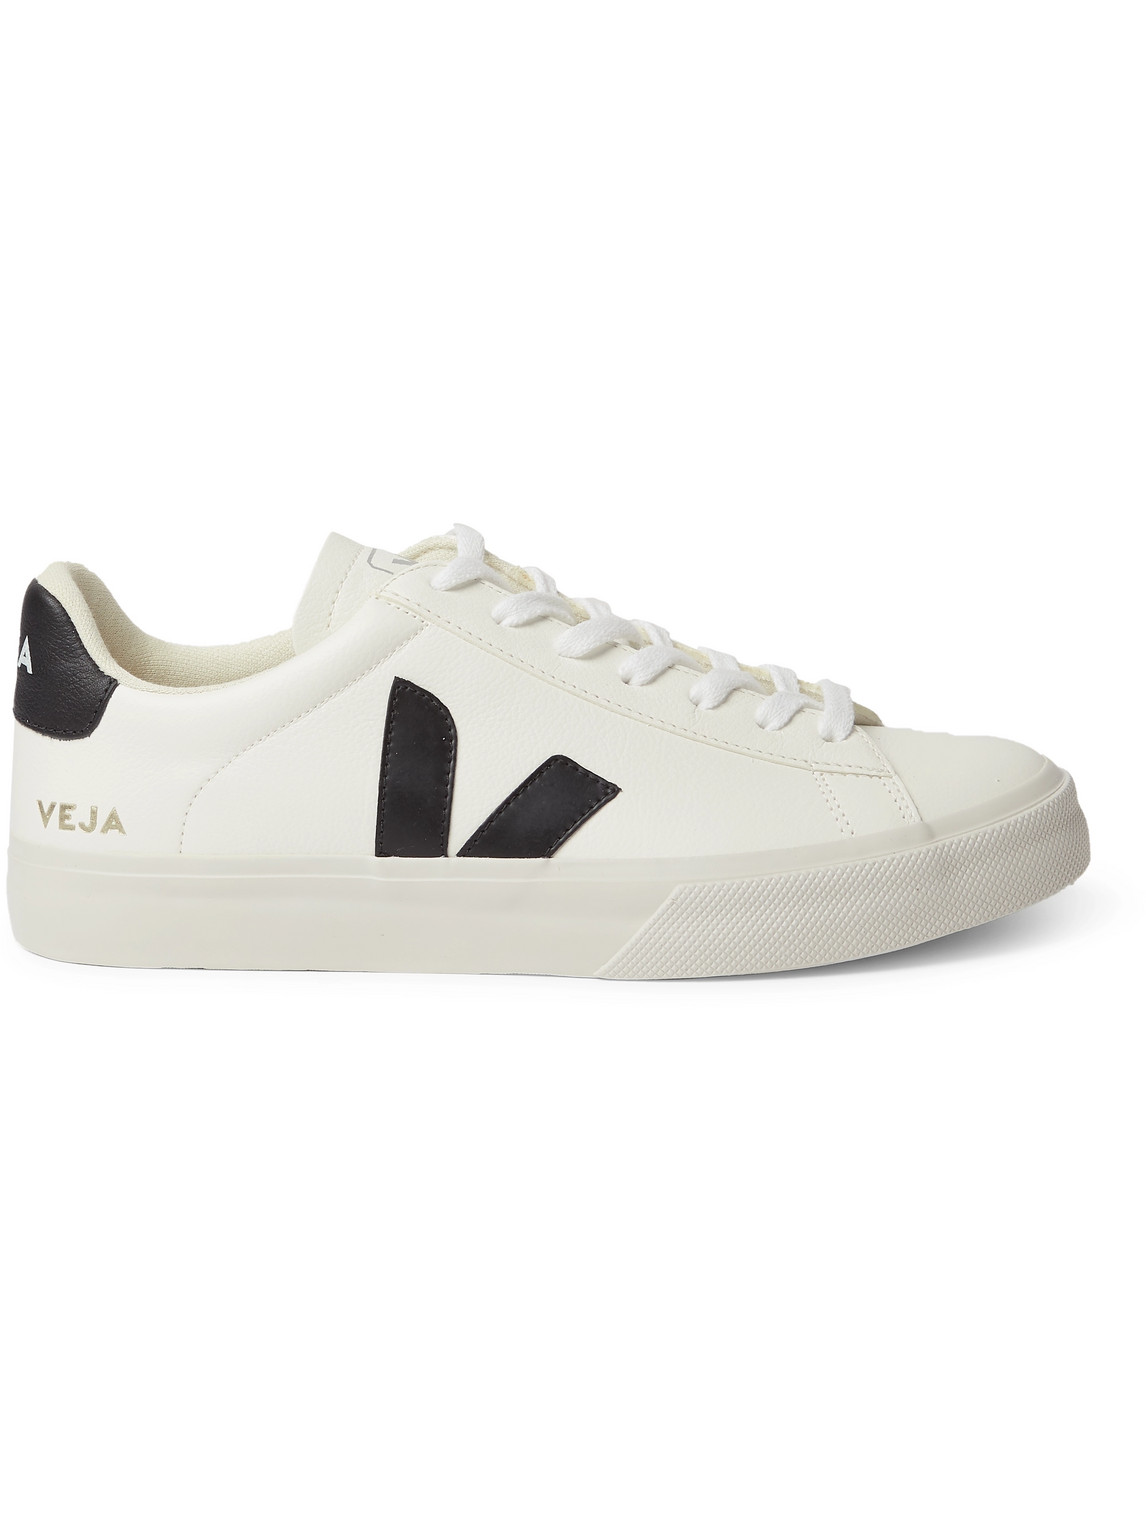 Veja Campo Rubber-Trimmed Leather Sneakers